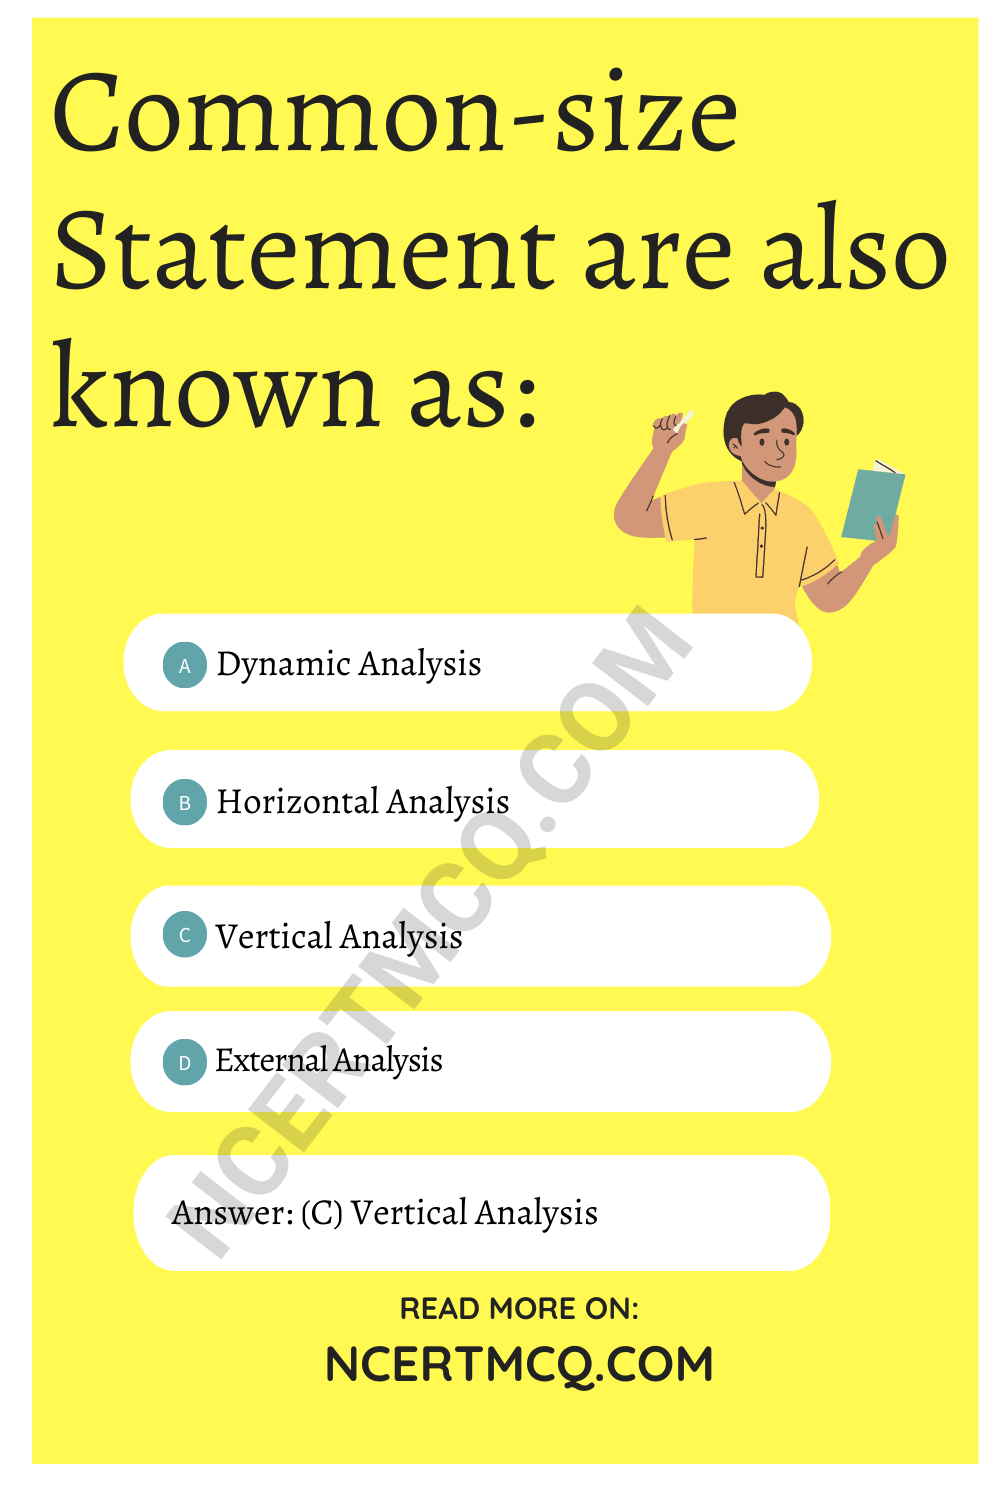 Common-size Statement are also known as: